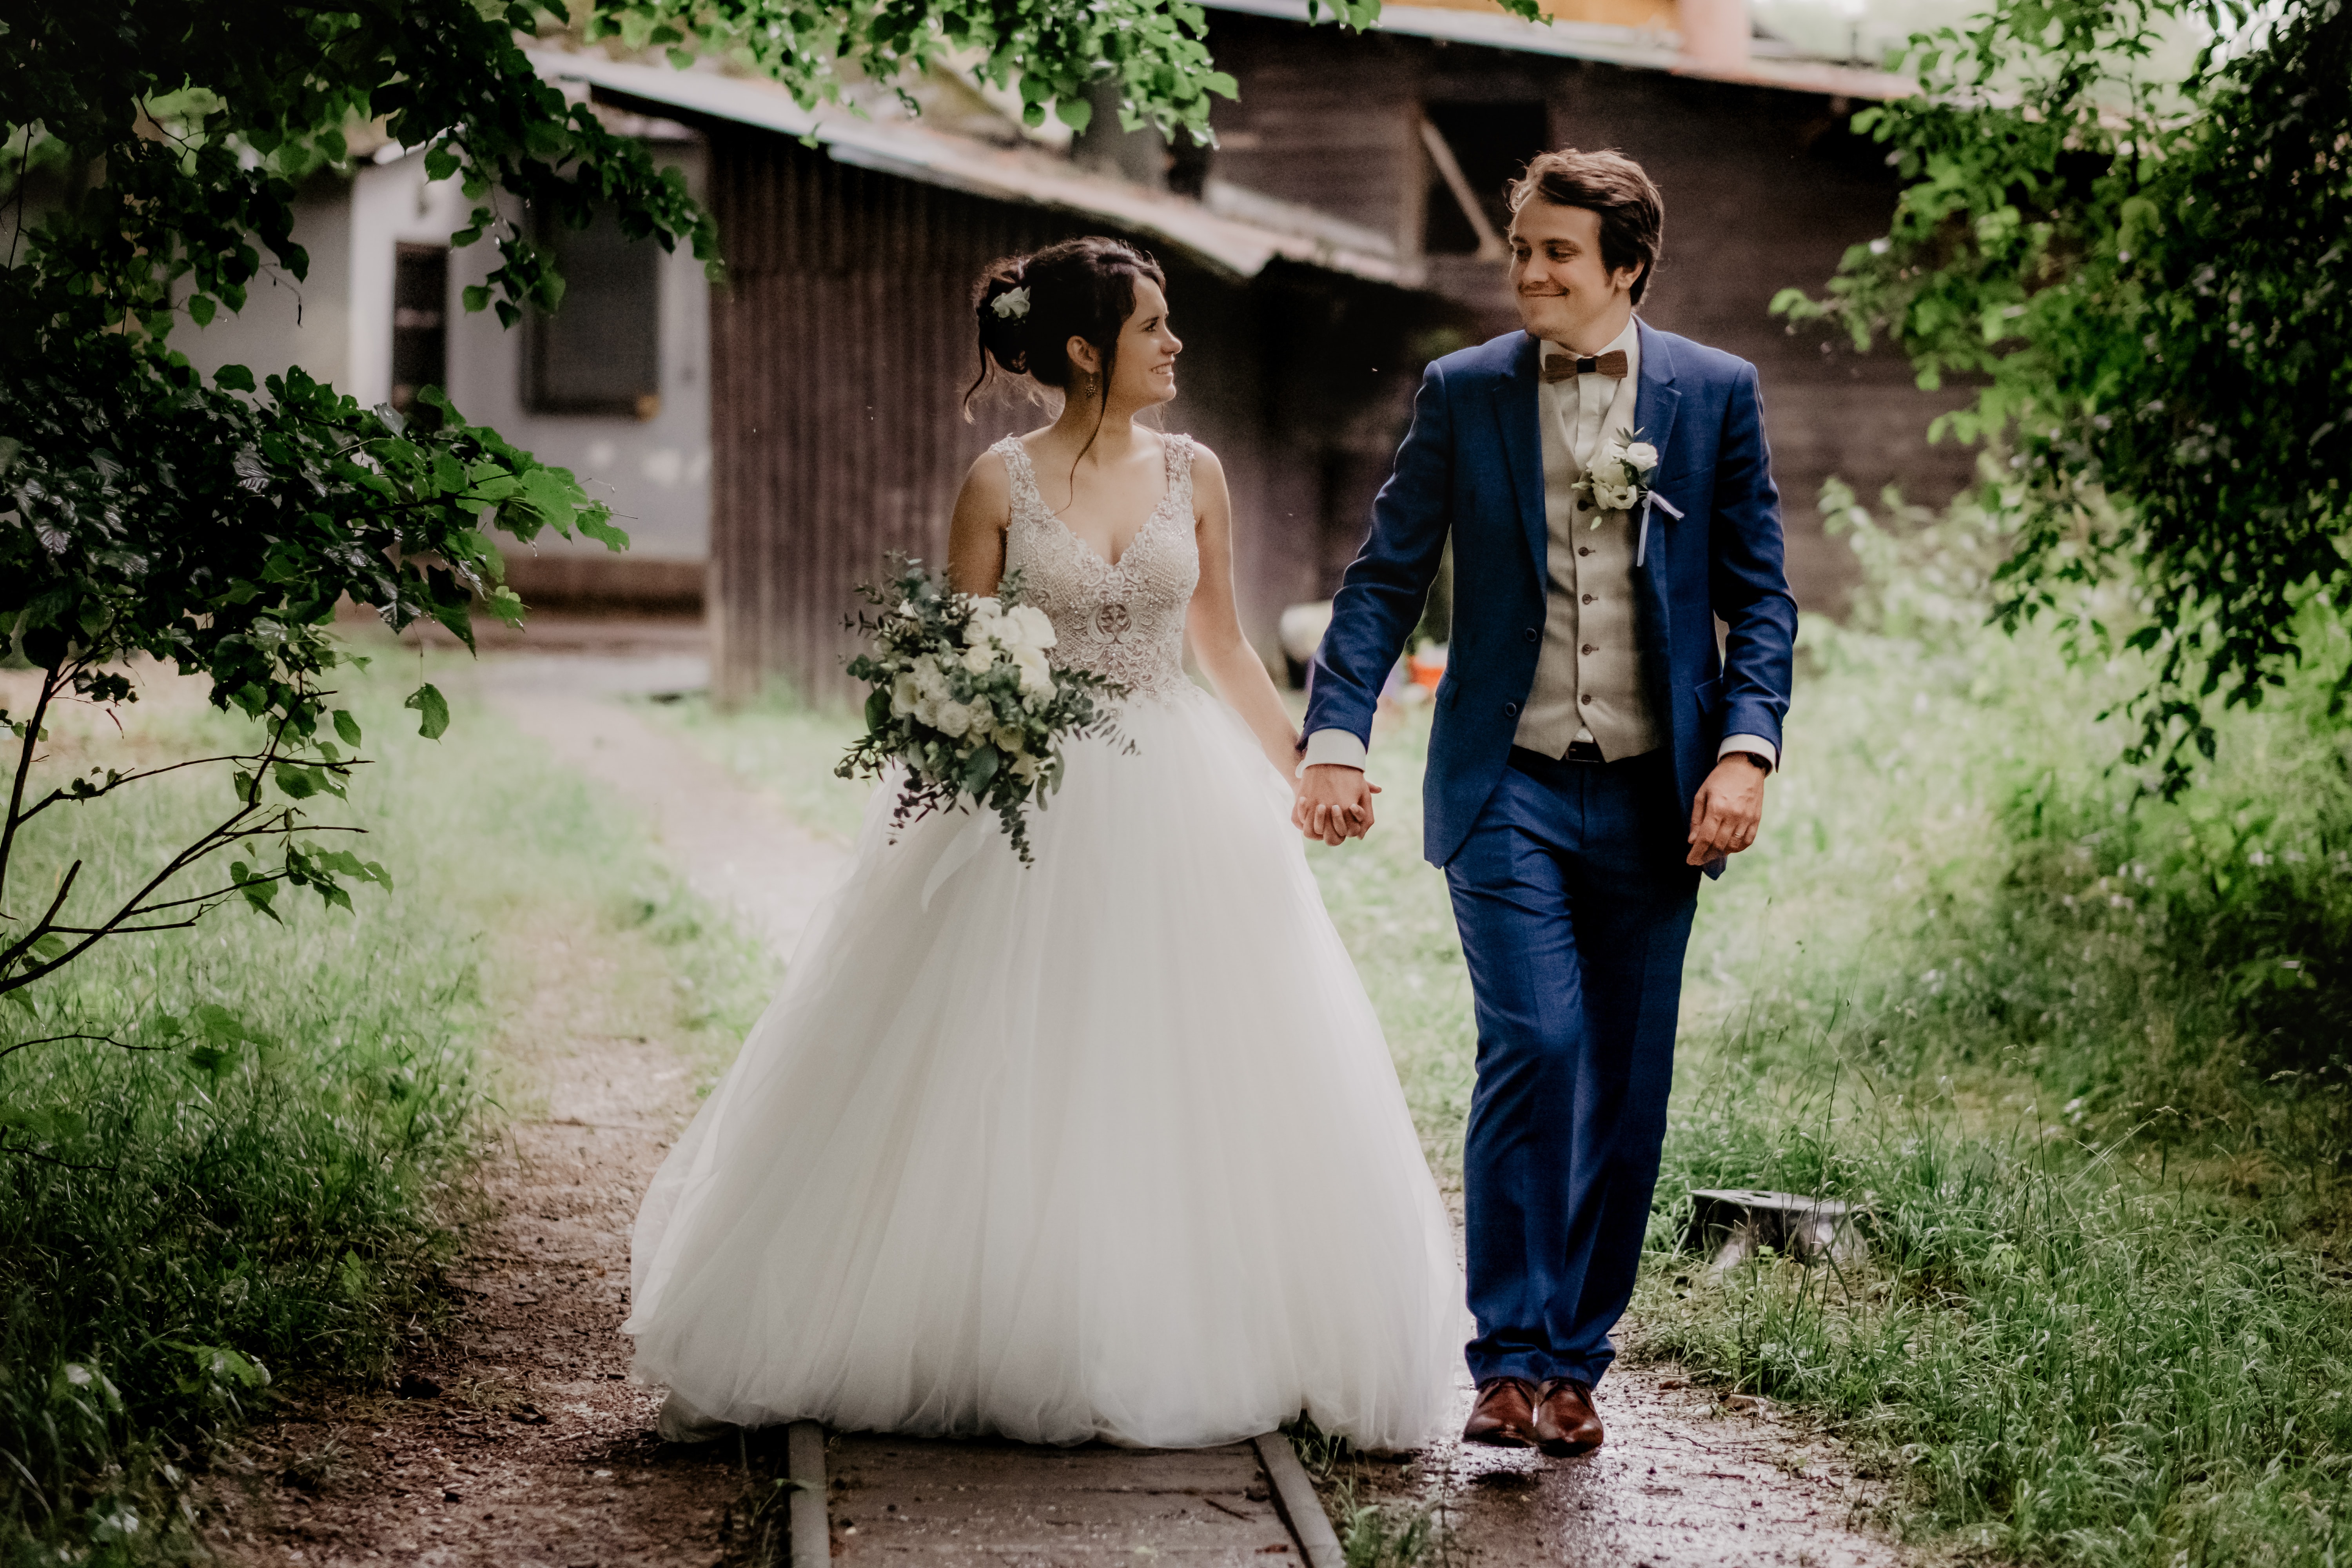 How to Find the Best Wedding Photographer in Austin